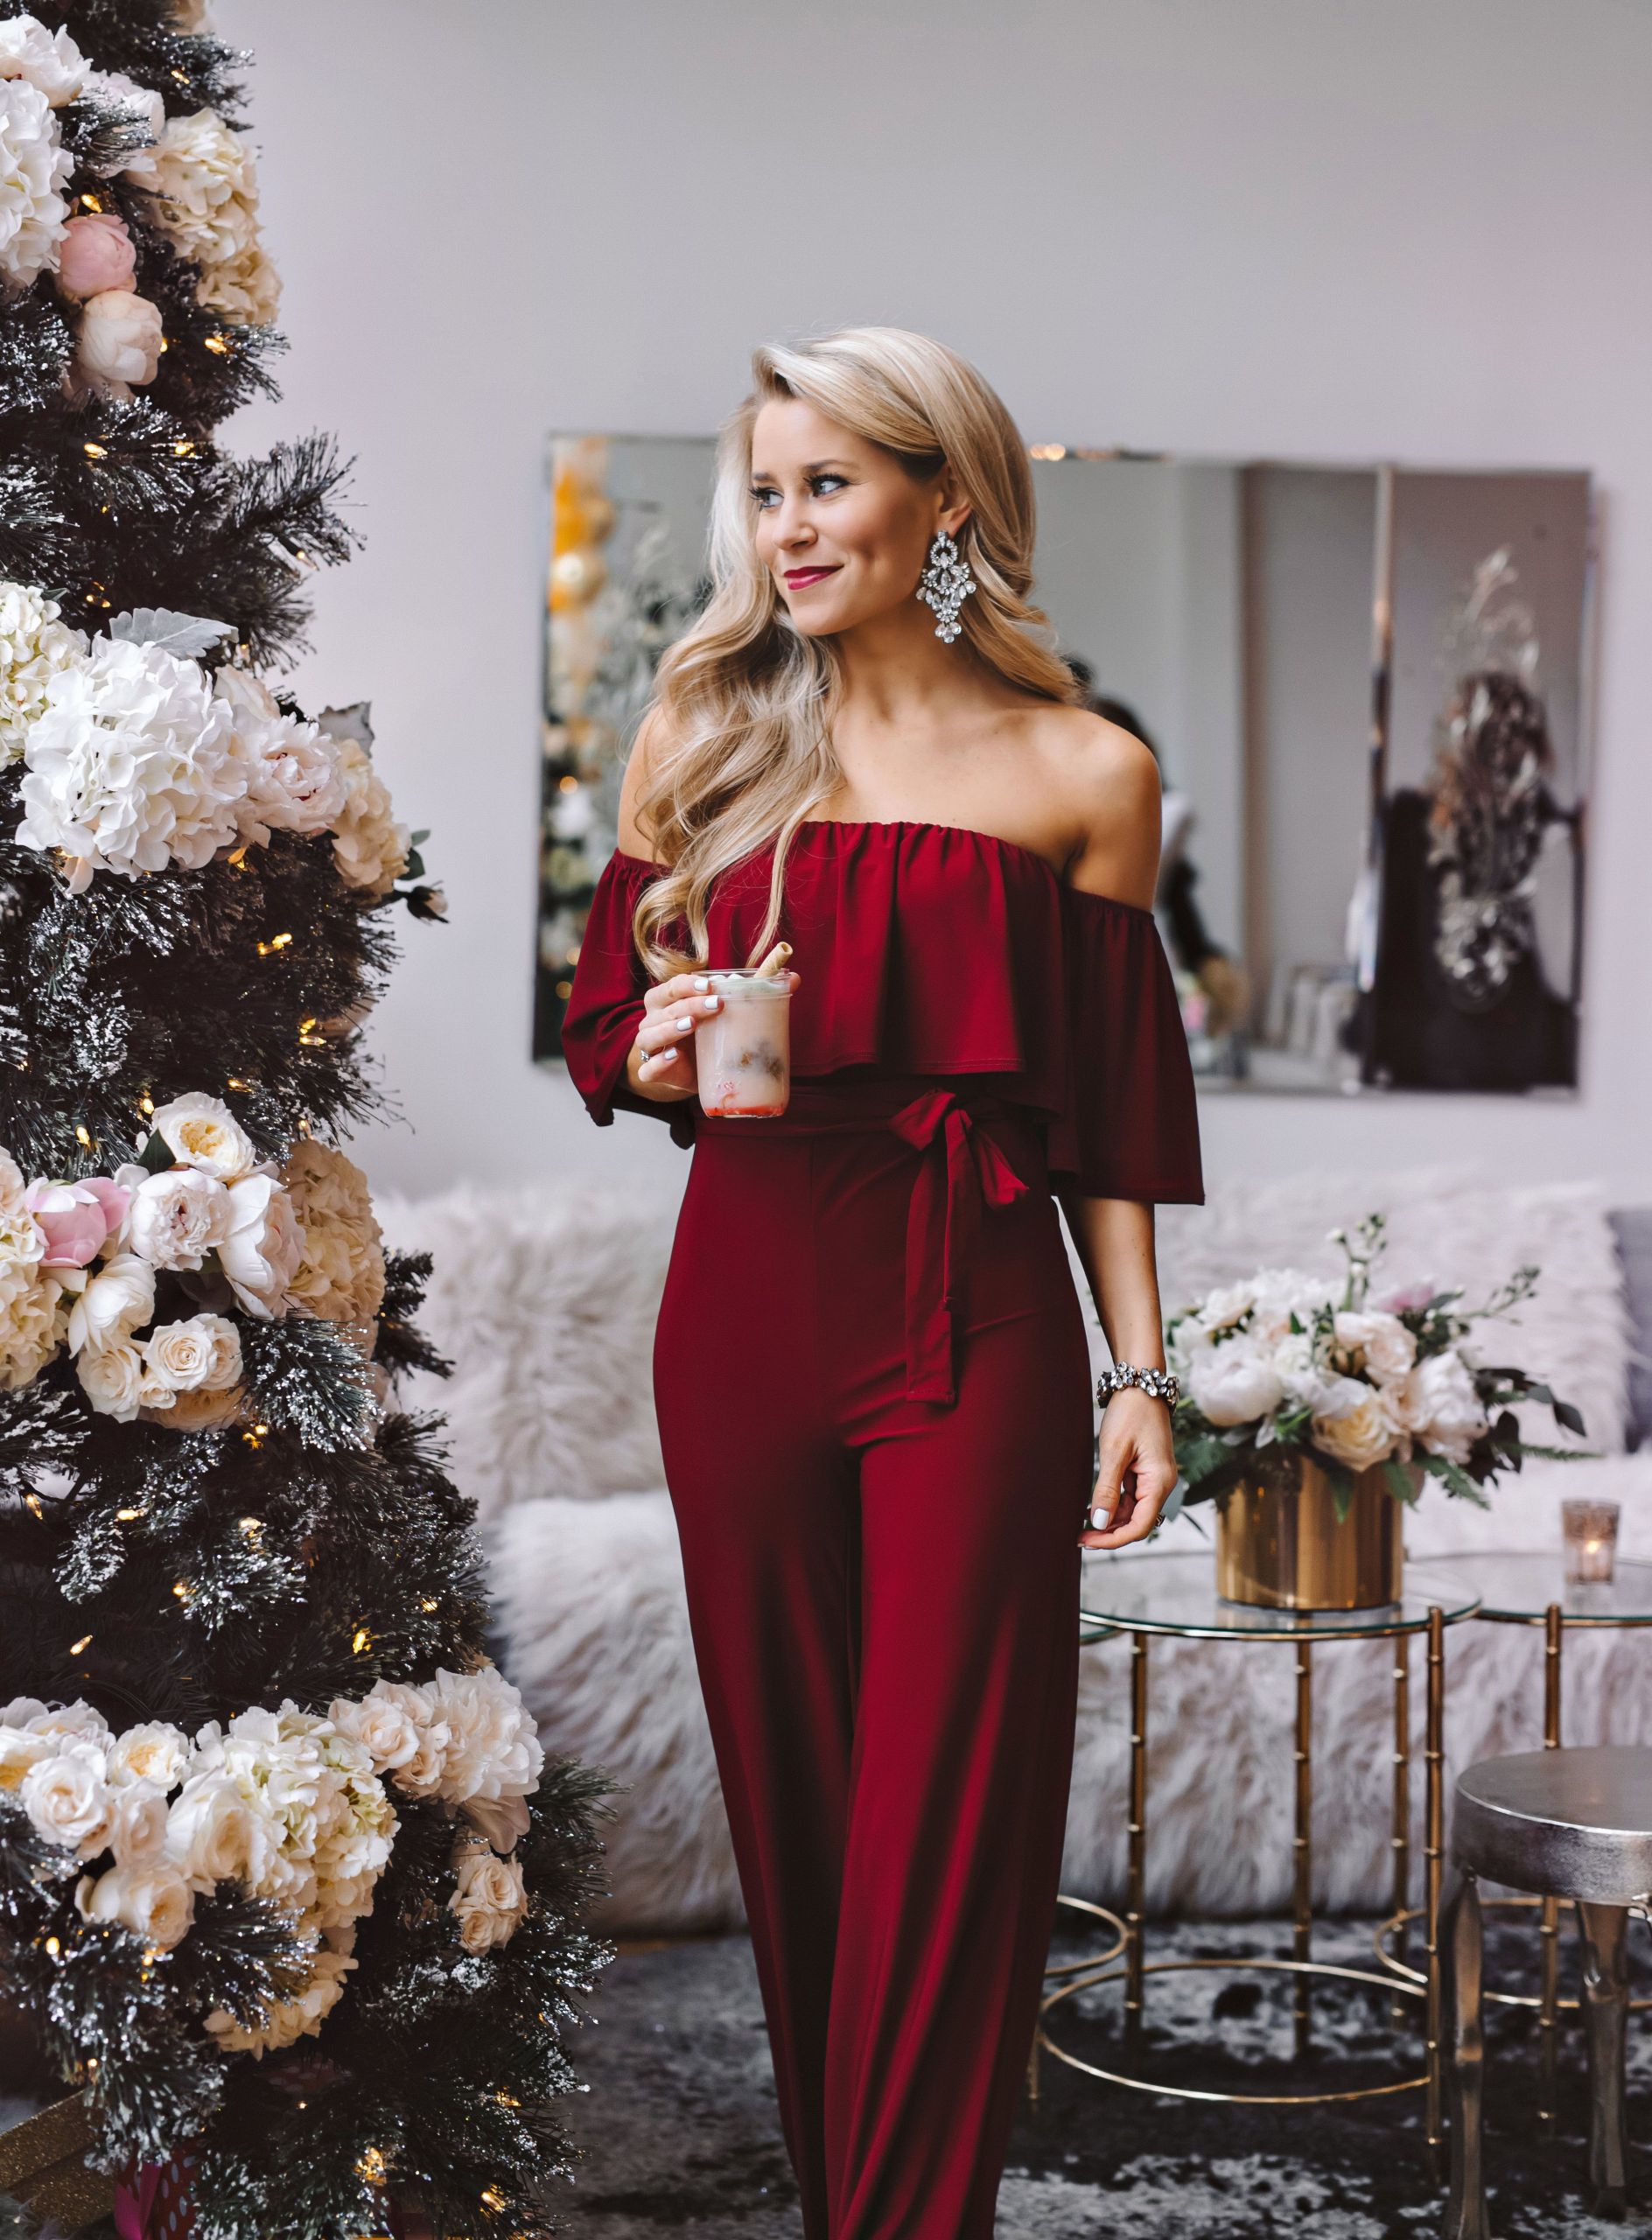 Christmas Holiday Party Outfit Ideas
 Holiday Party Decor Outfit Ideas